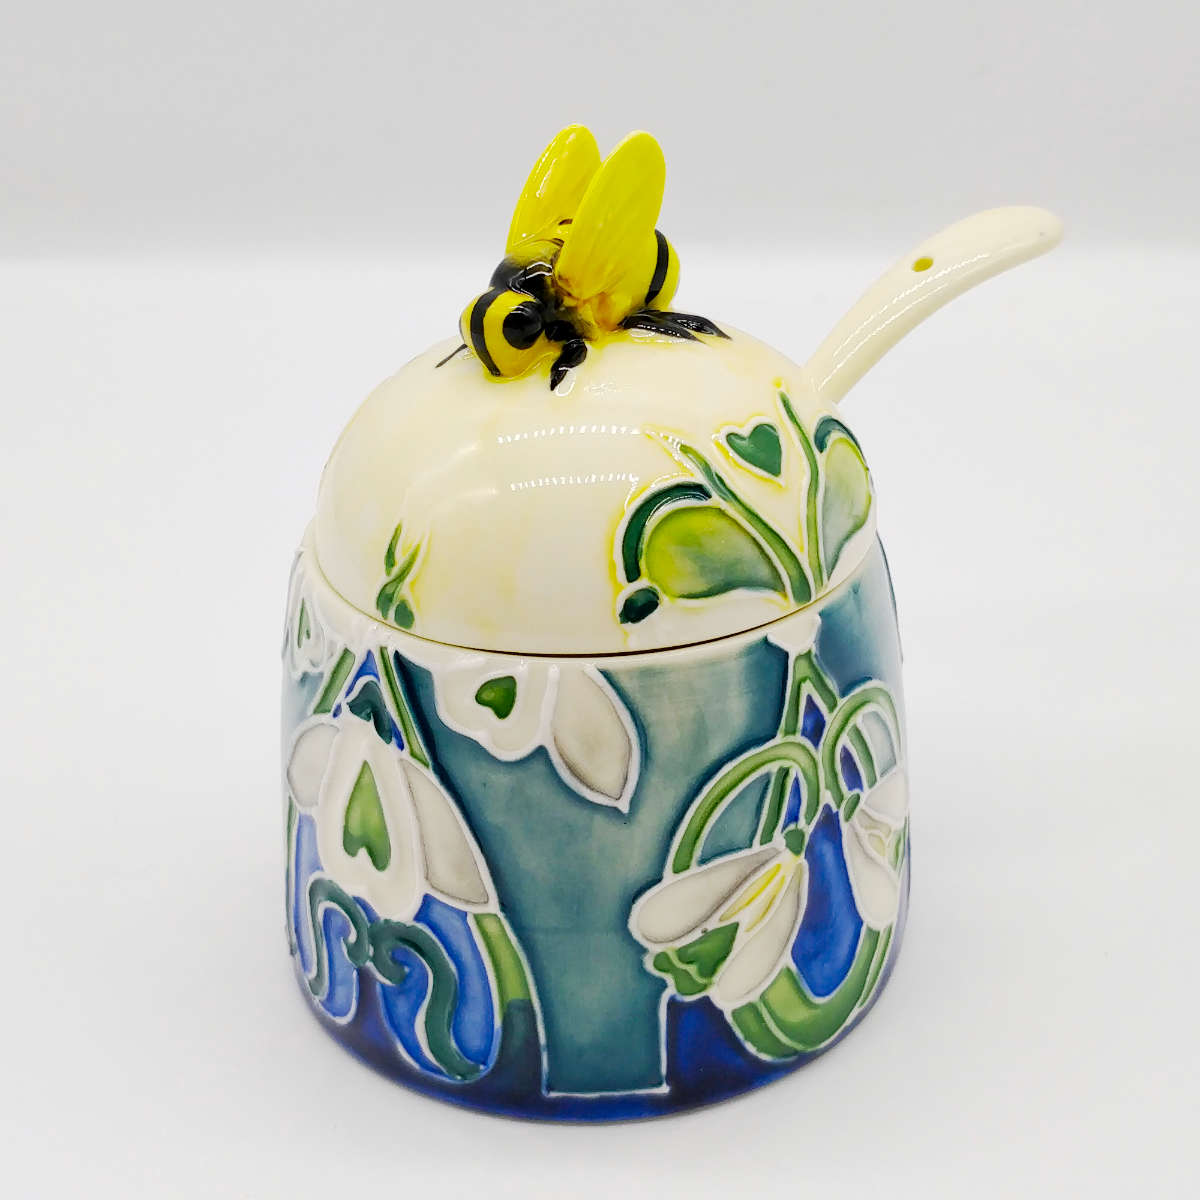 small round honey pot with lid and spoon made from ceramics white colour with blue green painted flowers